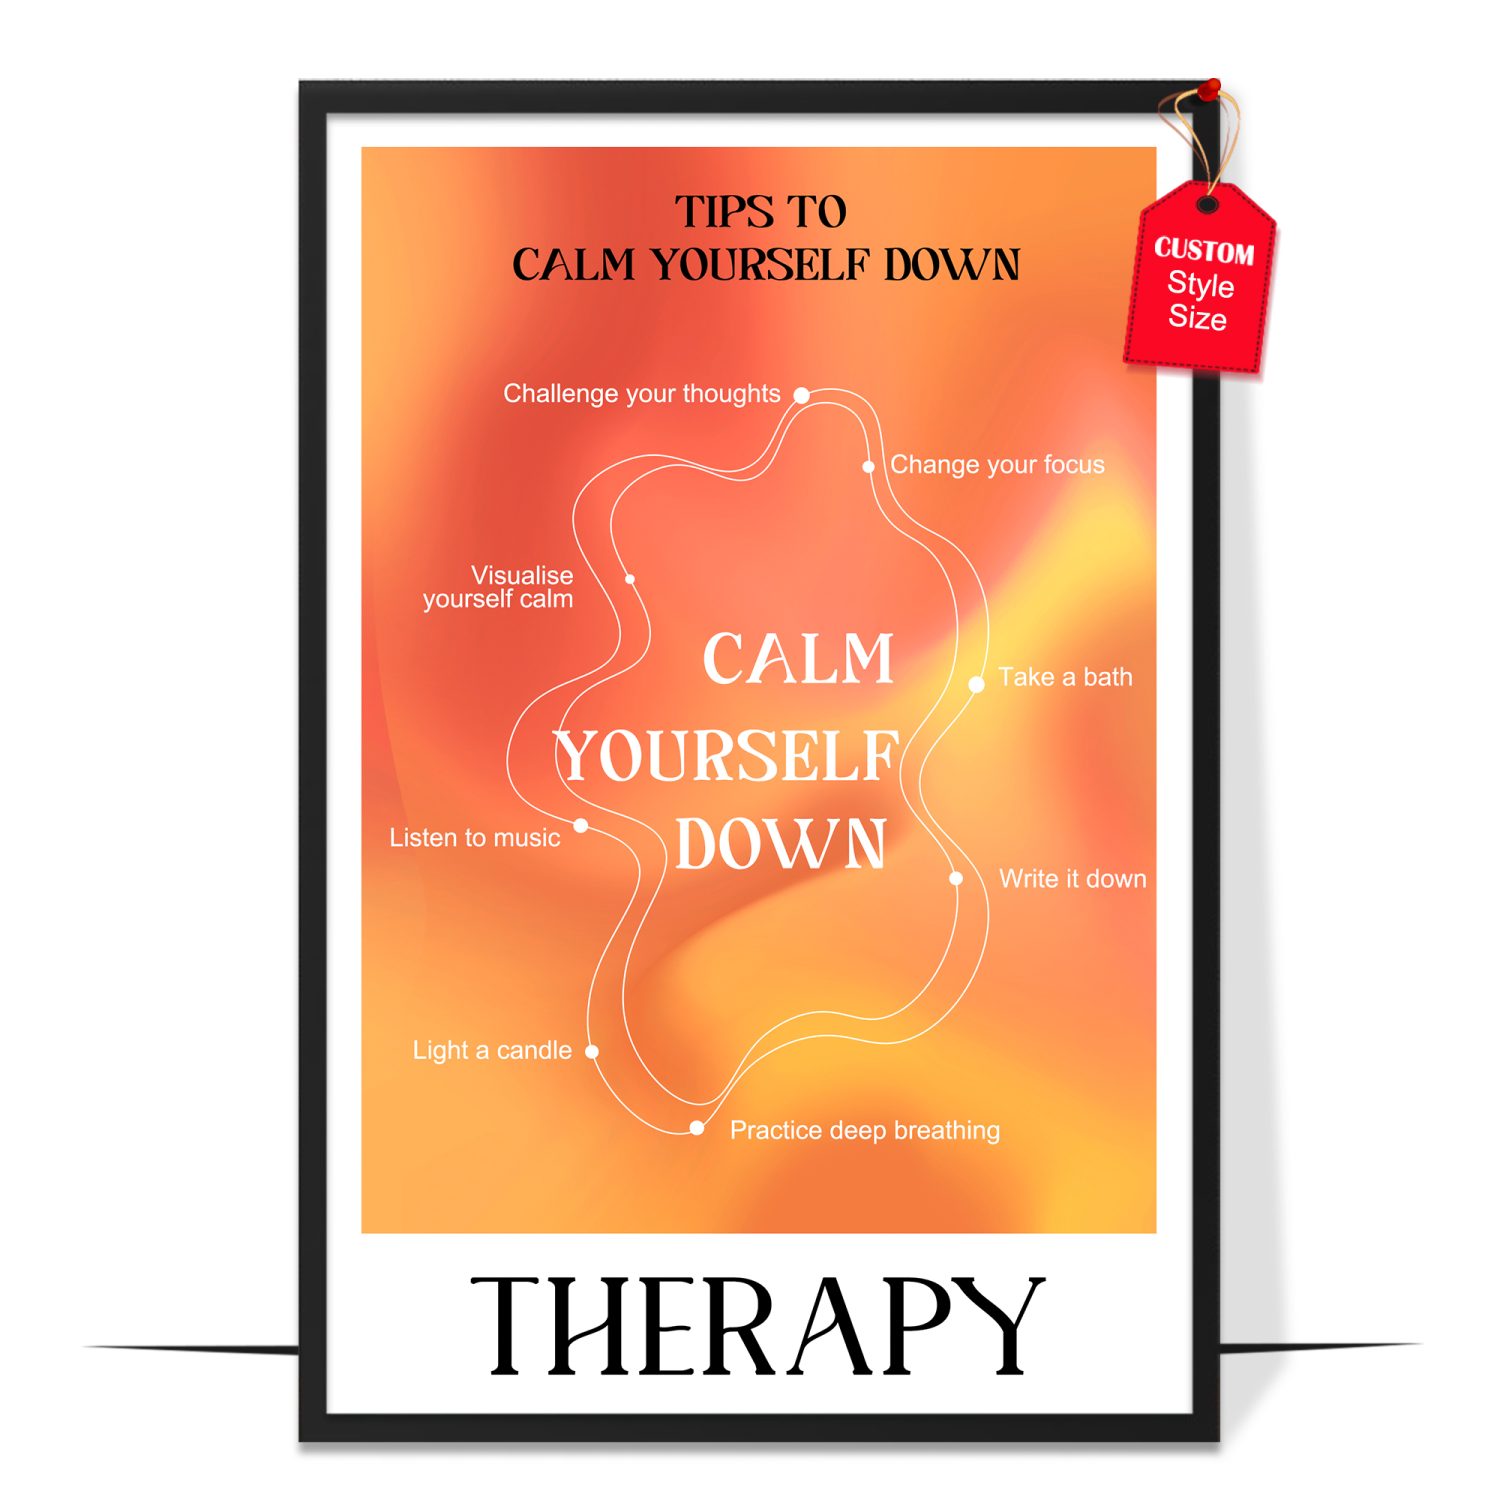 Tips To Calm Yourself Down Poster